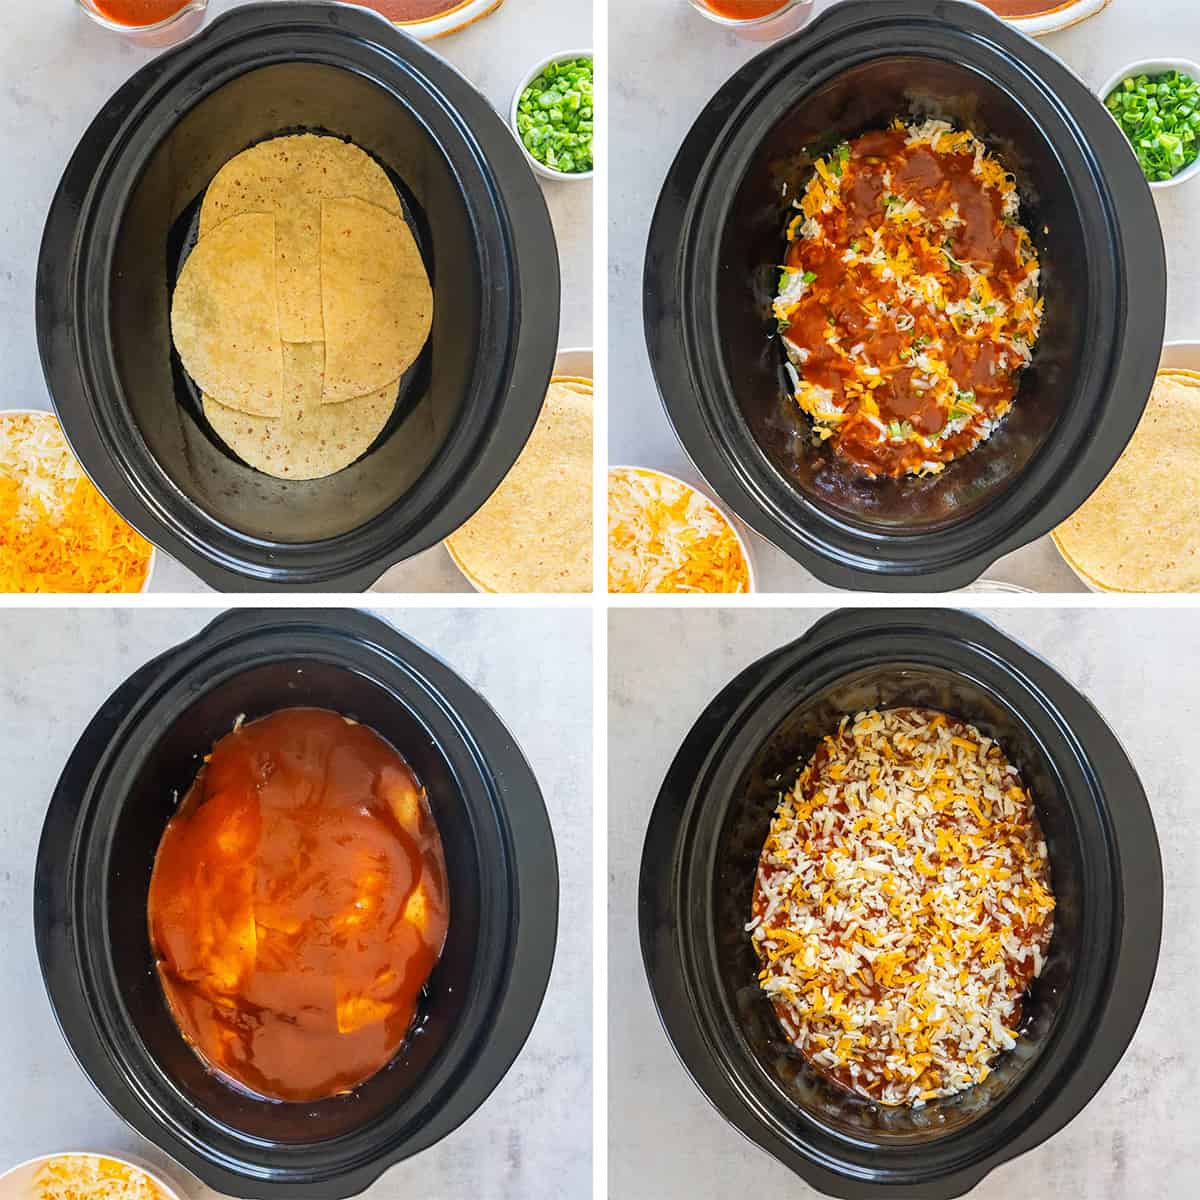 Four images of enchilada ingredients layered in a slow cooker.